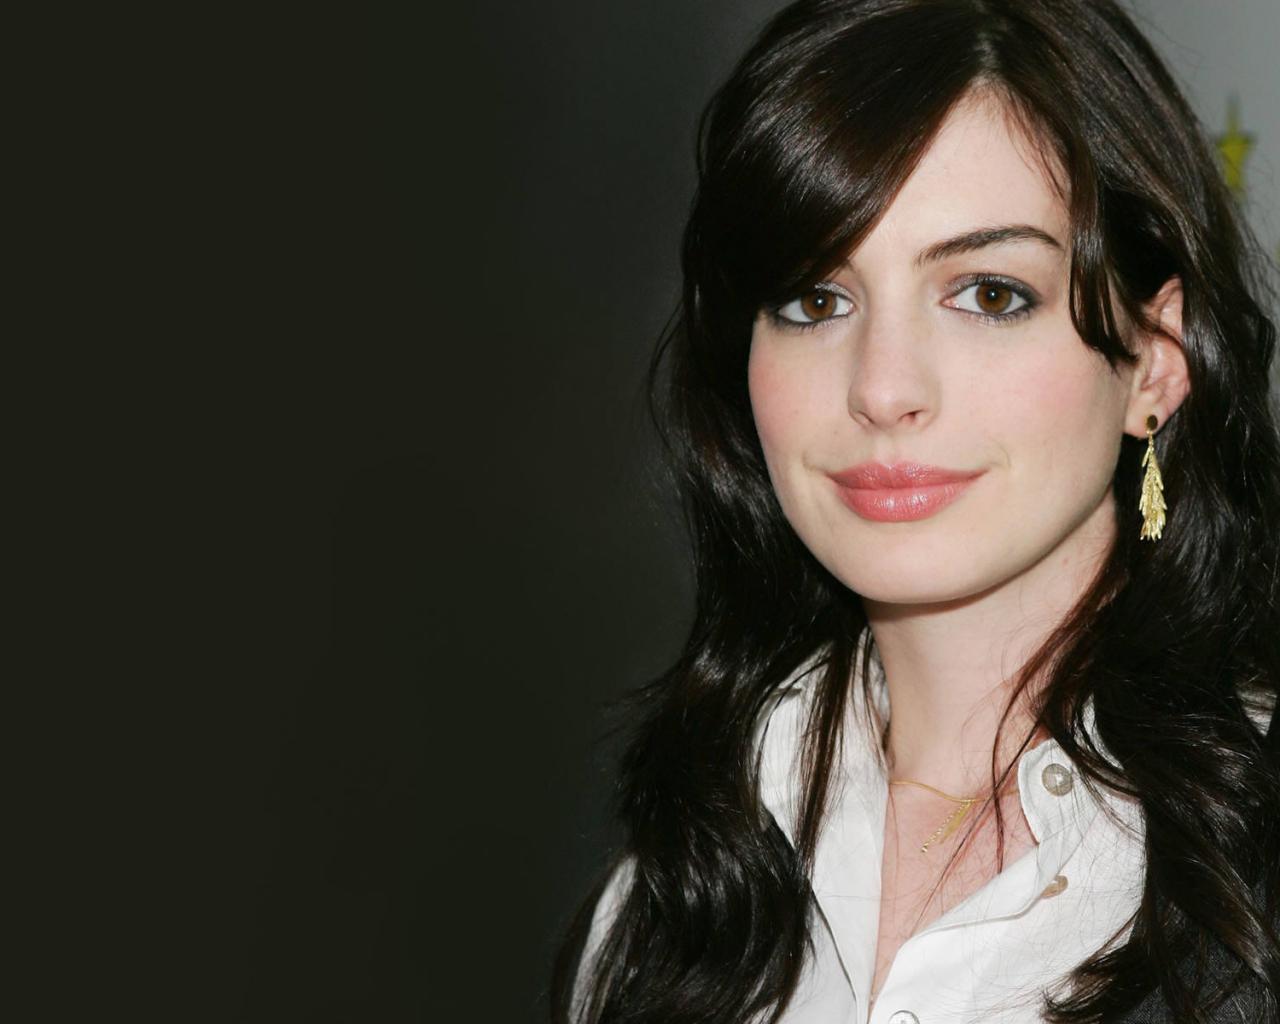 Beautiful Girls Wallpaper Hd Anne Hathaway | Wallpapers Quality